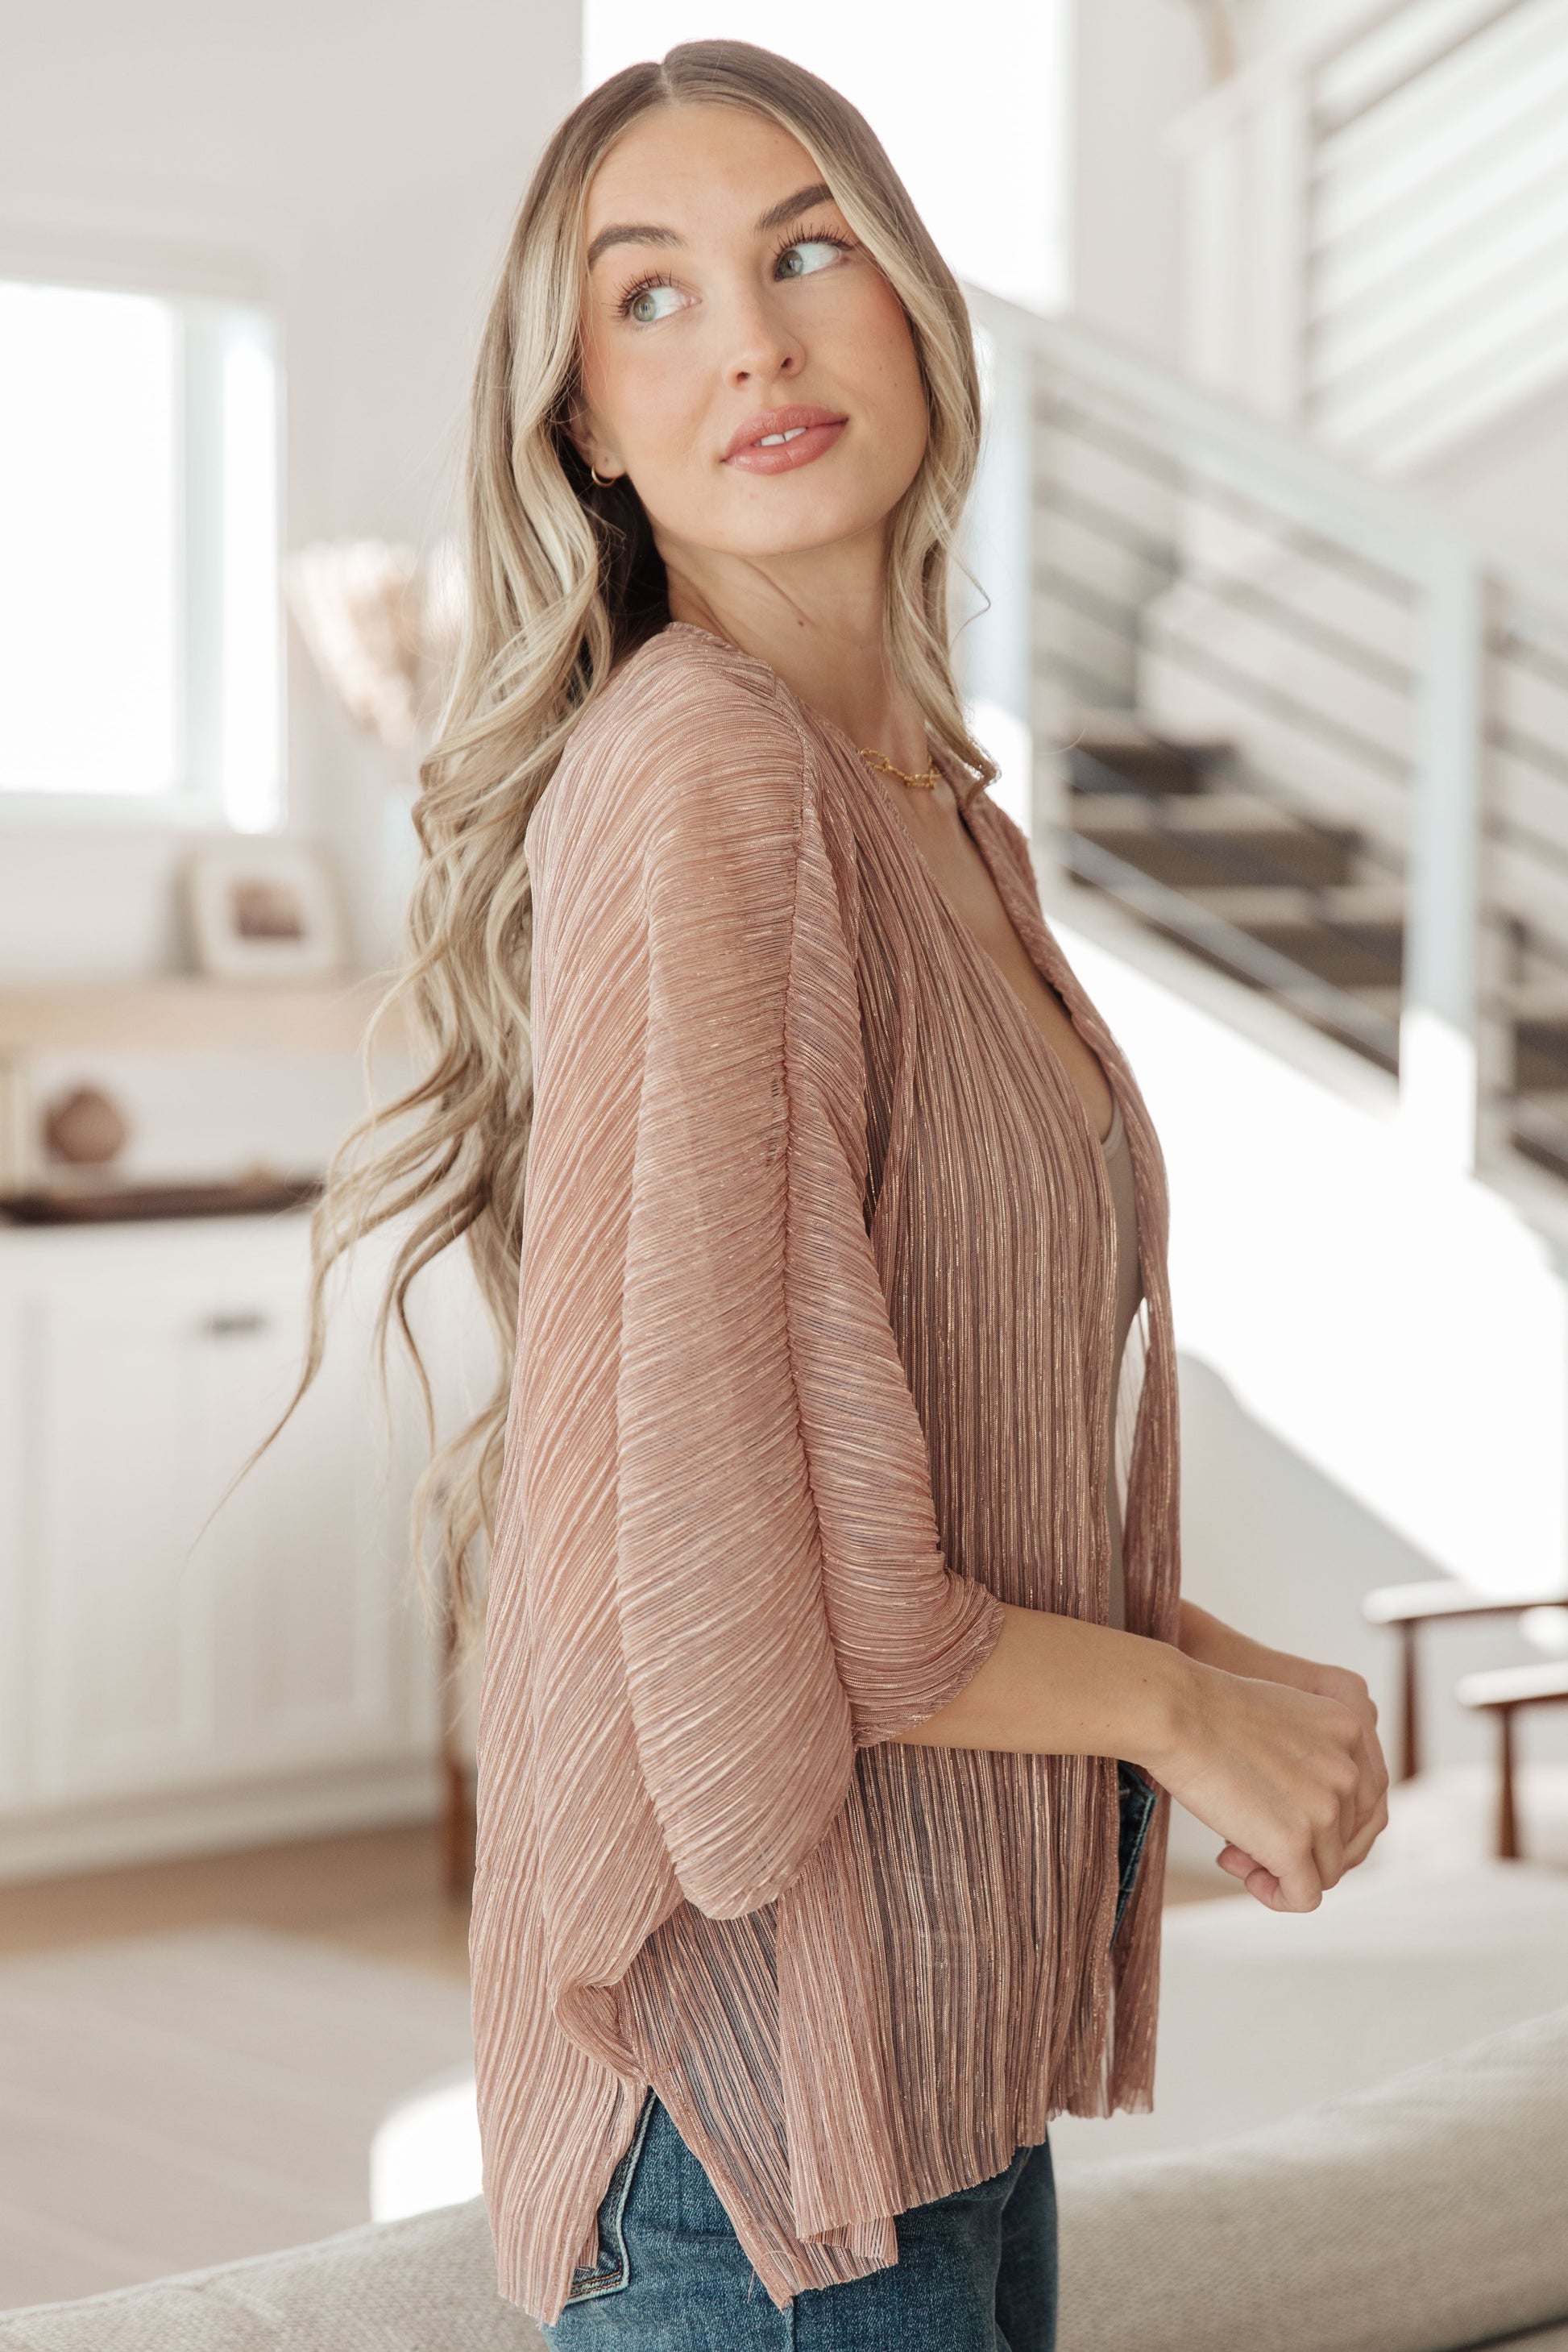 Perfect for party time, this Sheer Sign Kimono is crafted of sheer accordion fabric with lurex thread accents for a stunning shimmer. Its open front design and full-length silhouette will ensure you look your best for your next cocktail hour. S - 3X